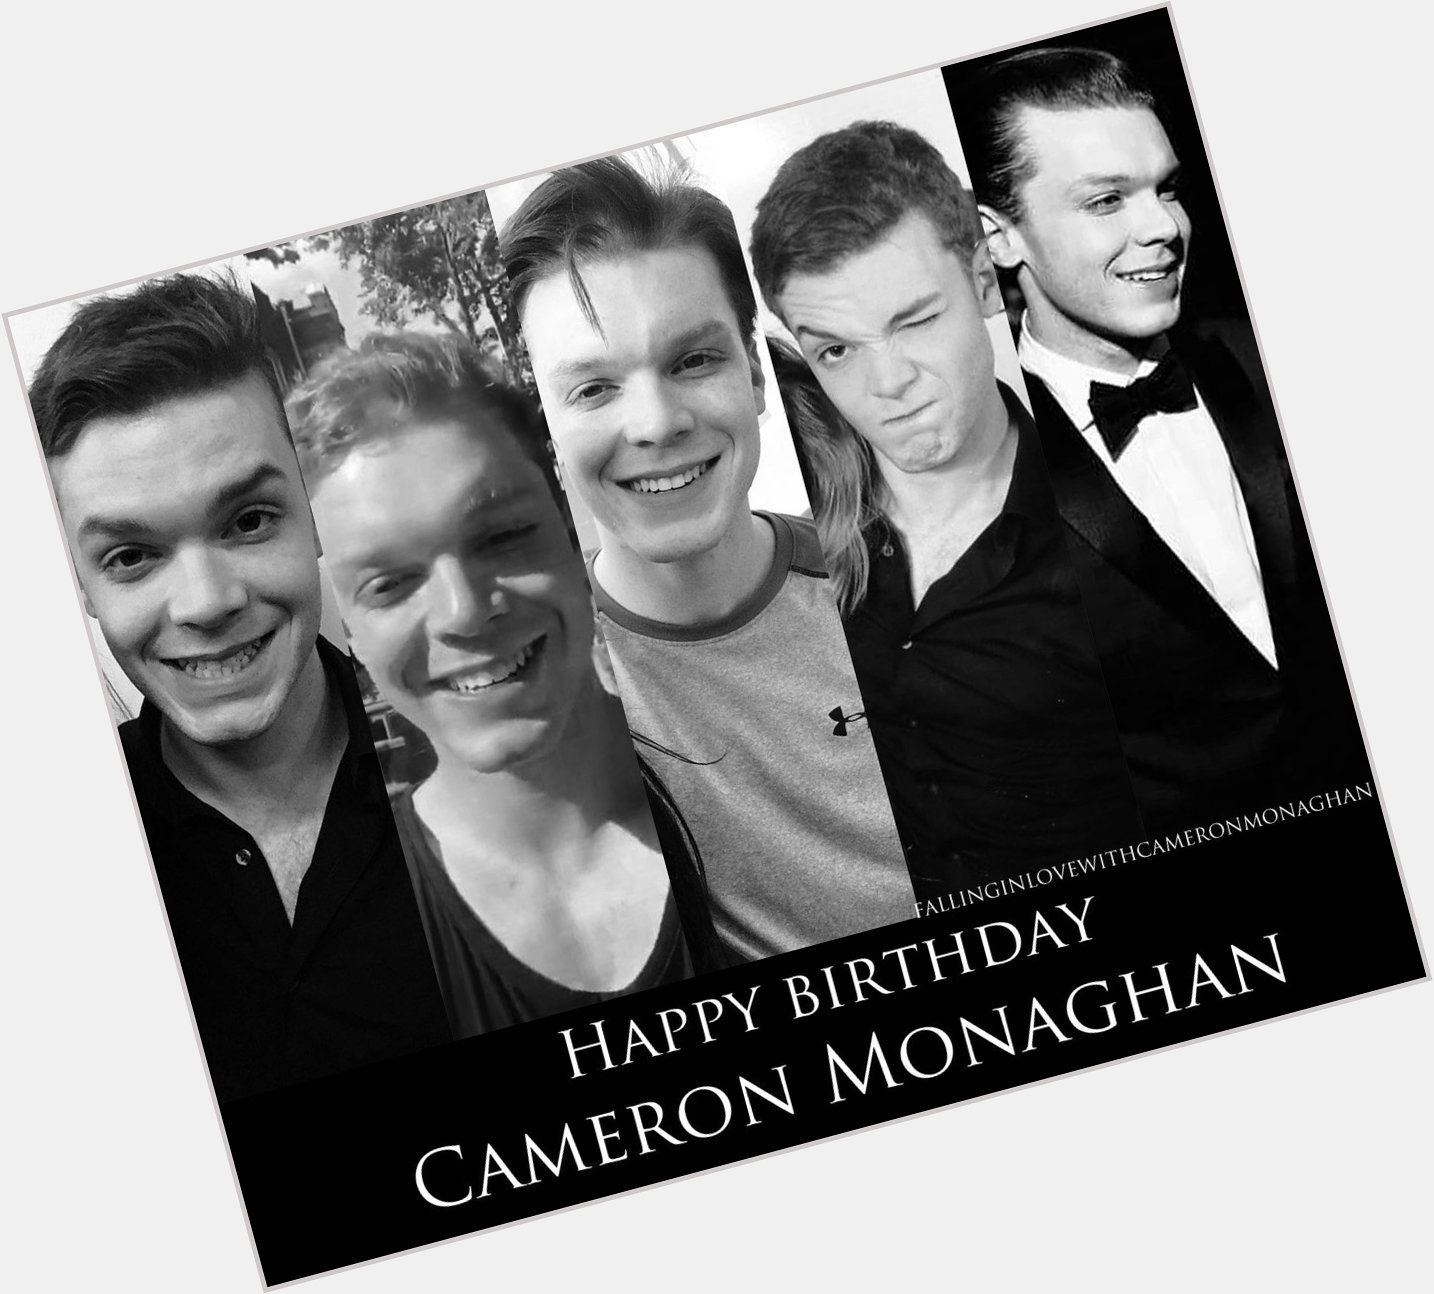 In Italy it\s midnight so... Happy 24th birthday Cameron Monaghan! I\m so proud of you.  